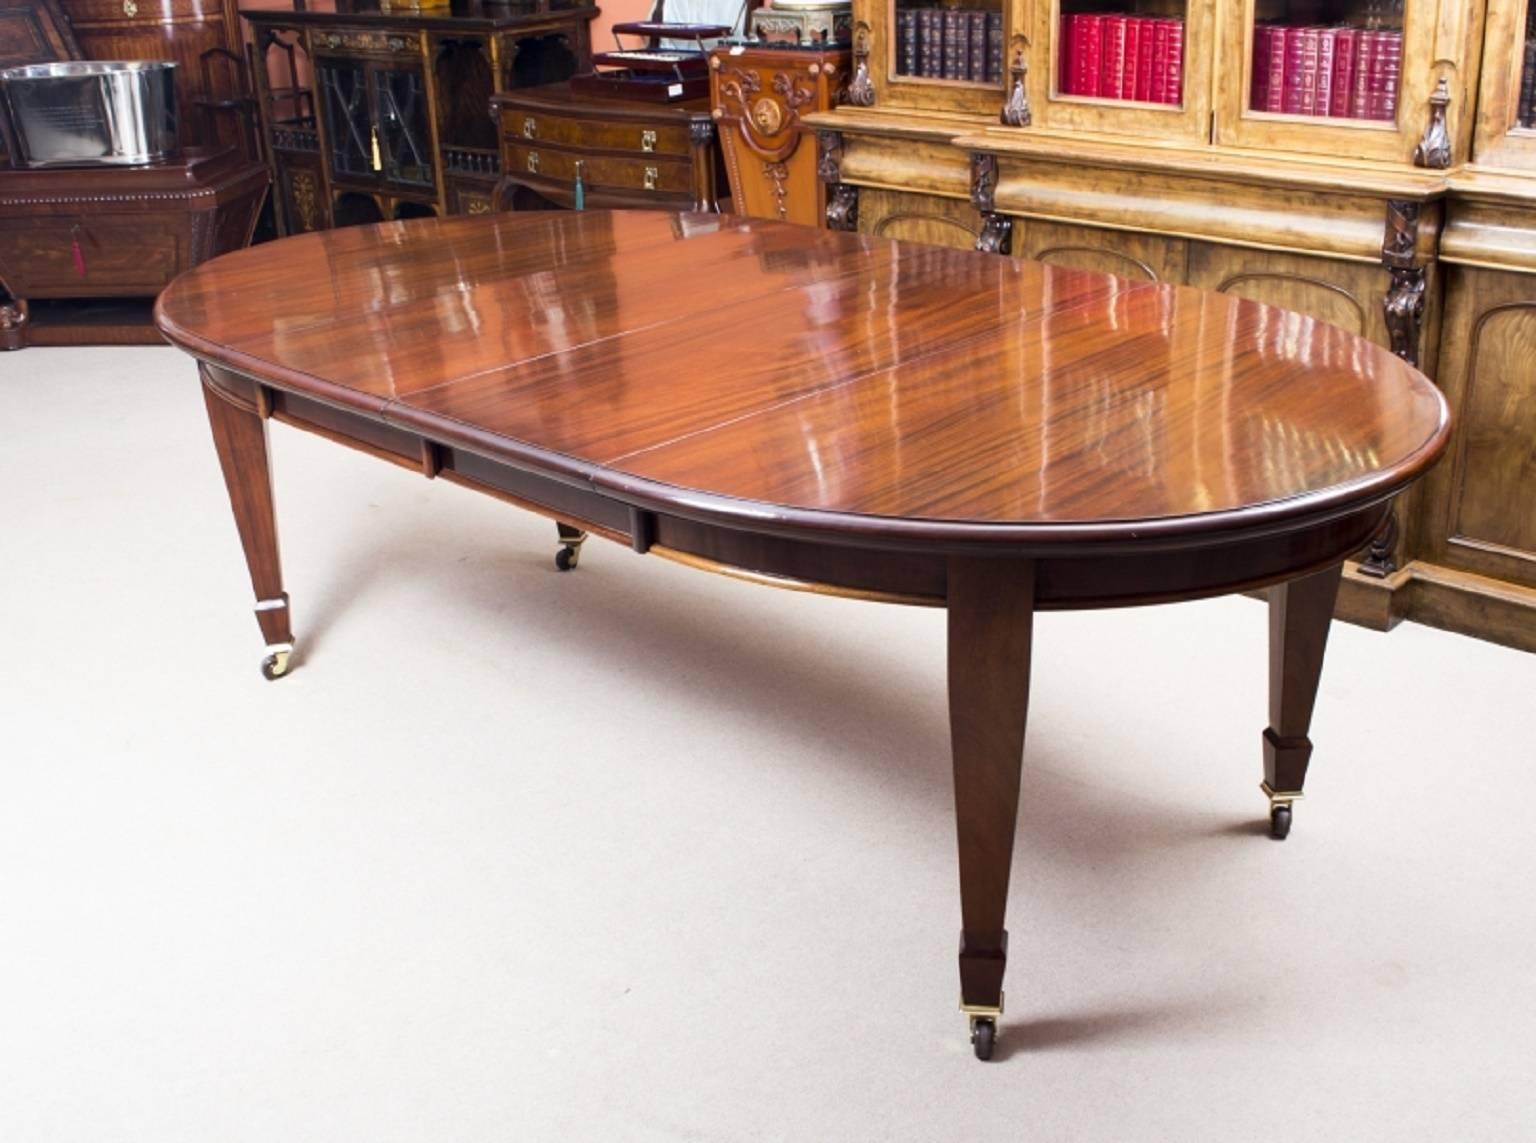 This is a rare opportunity to own an antique Edwardian oval extending dining table, made of flame mahogany and the matching set of eight antique Edwardian shield back dining chairs.

The table has two leaves which can be added or removed as